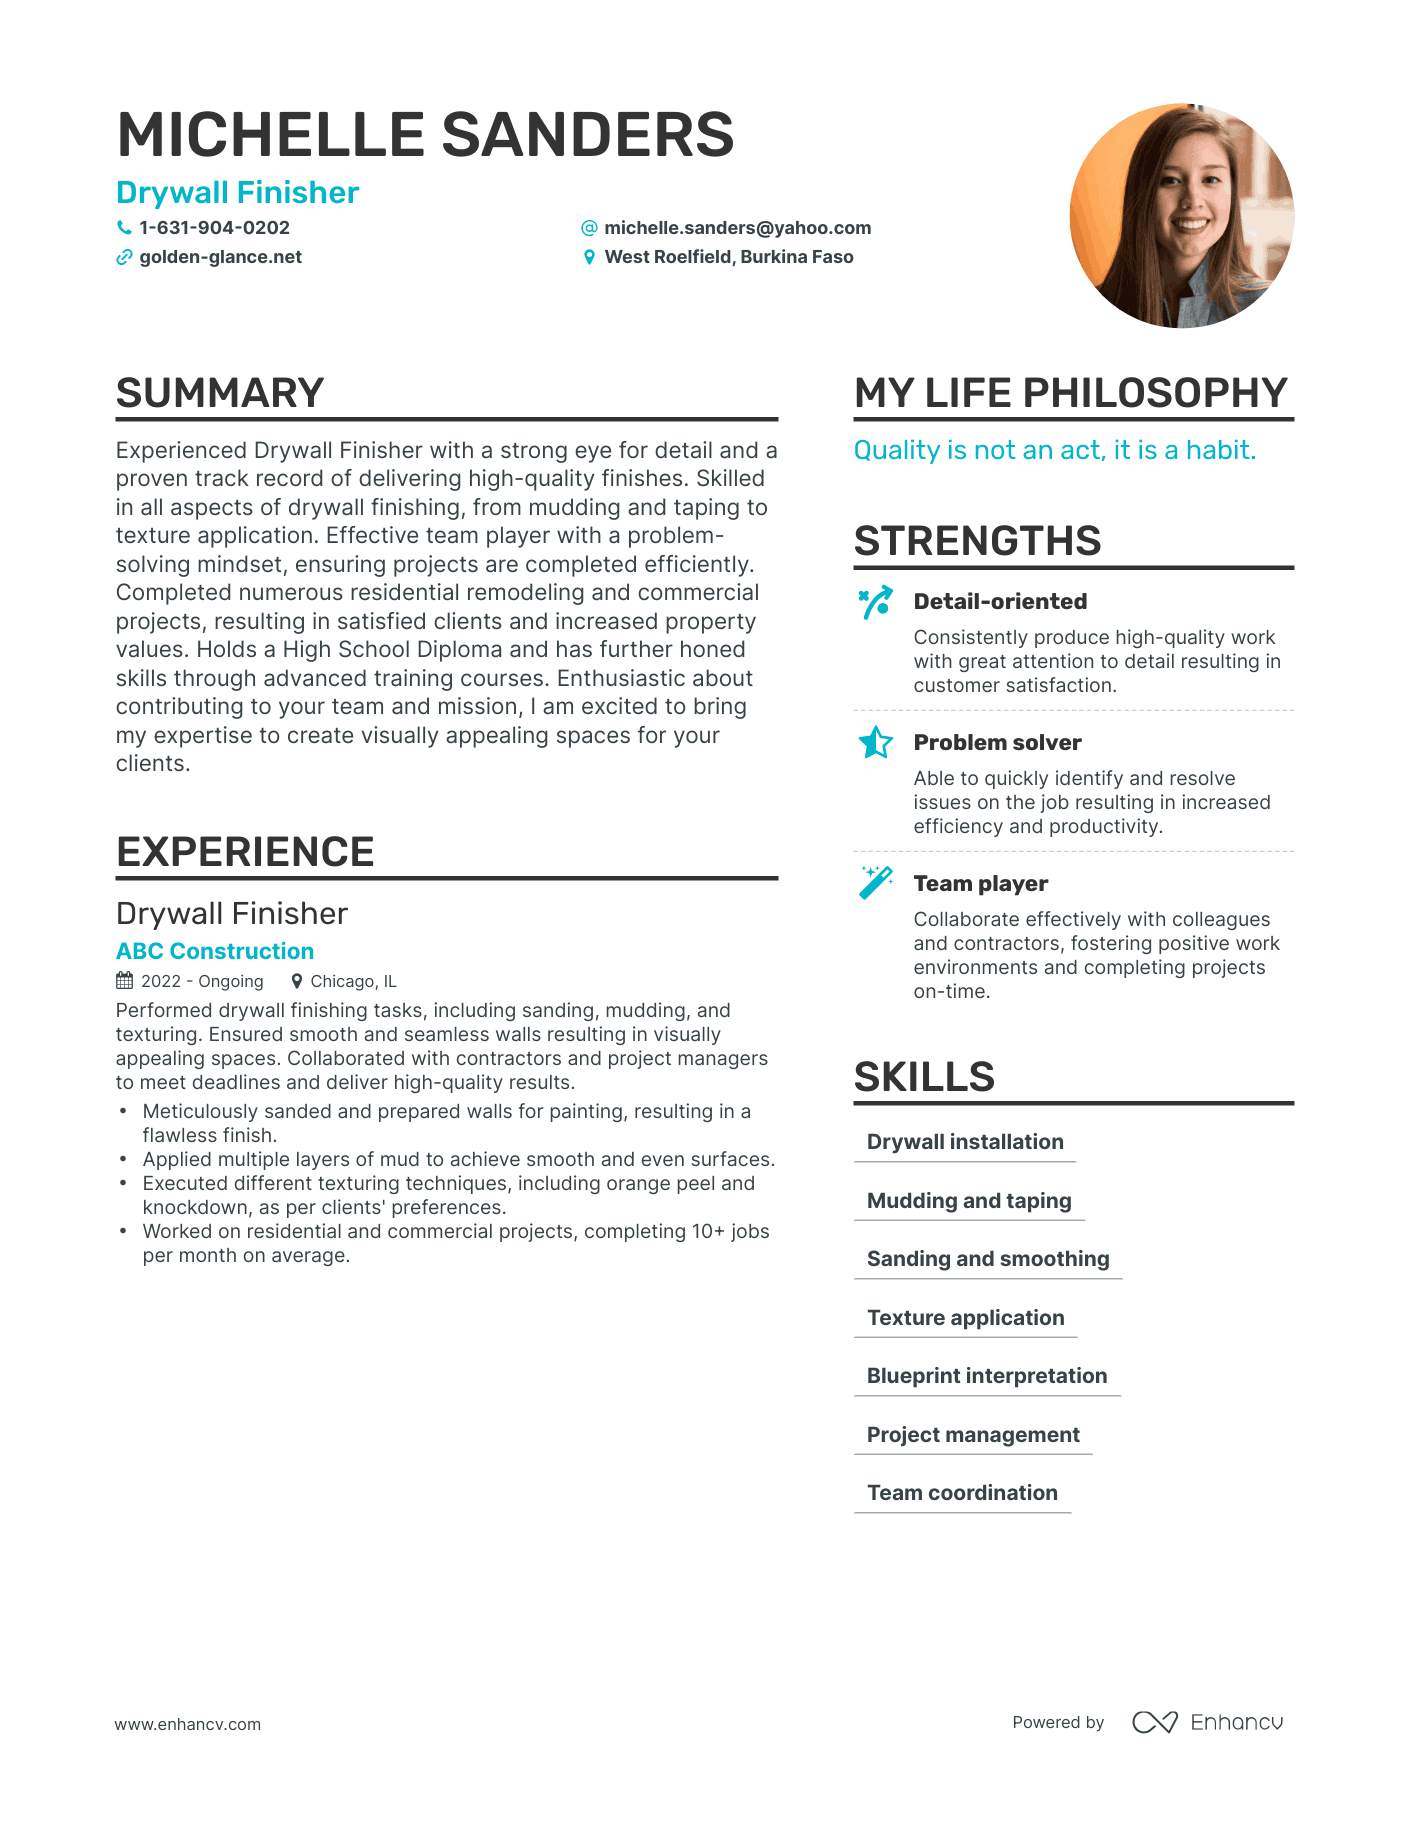 Drywall Finisher resume example